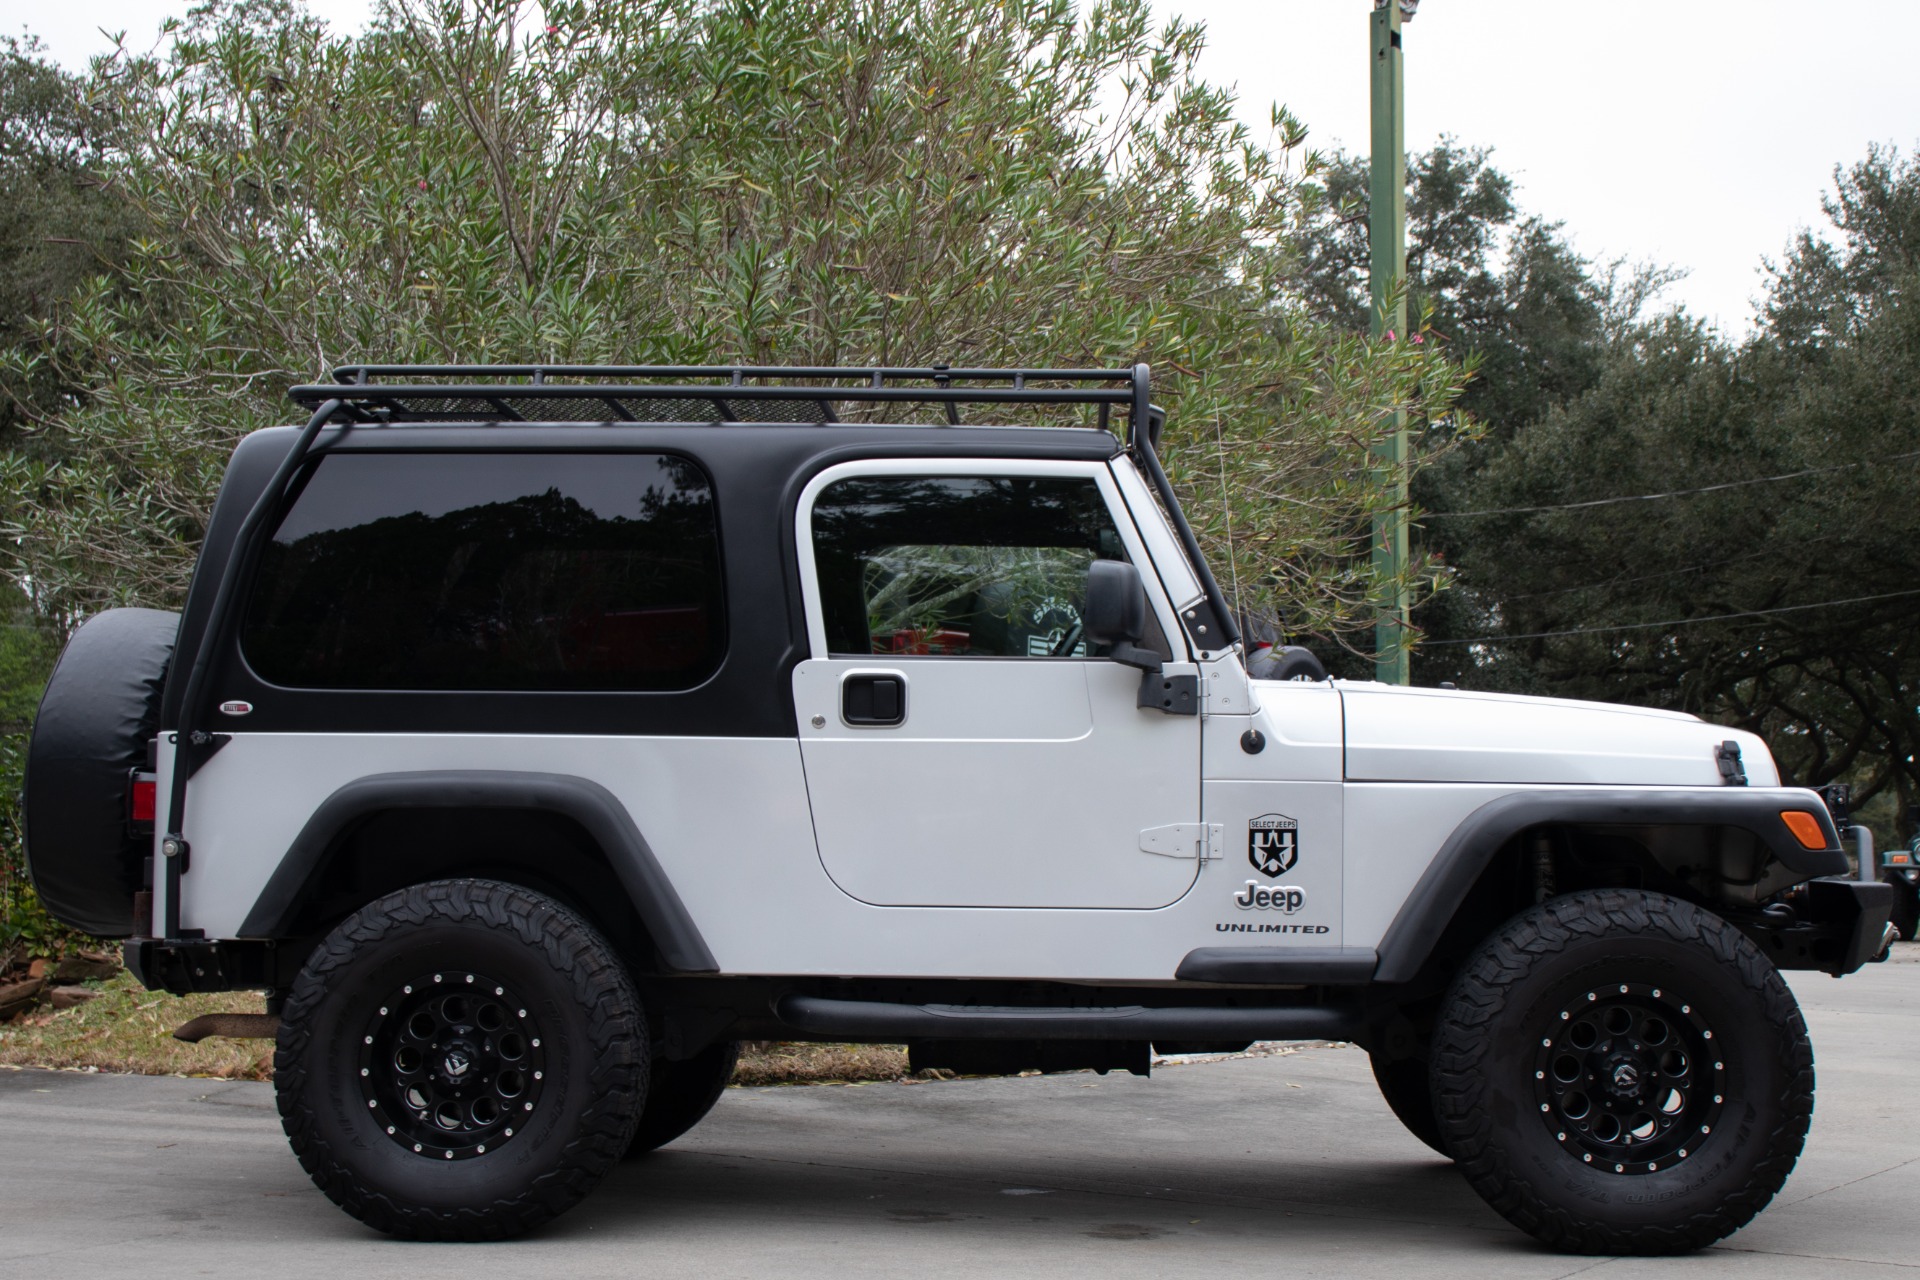 Used 2004 Jeep Wrangler Unlimited For Sale ($21,995) | Select Jeeps Inc.  Stock #759456